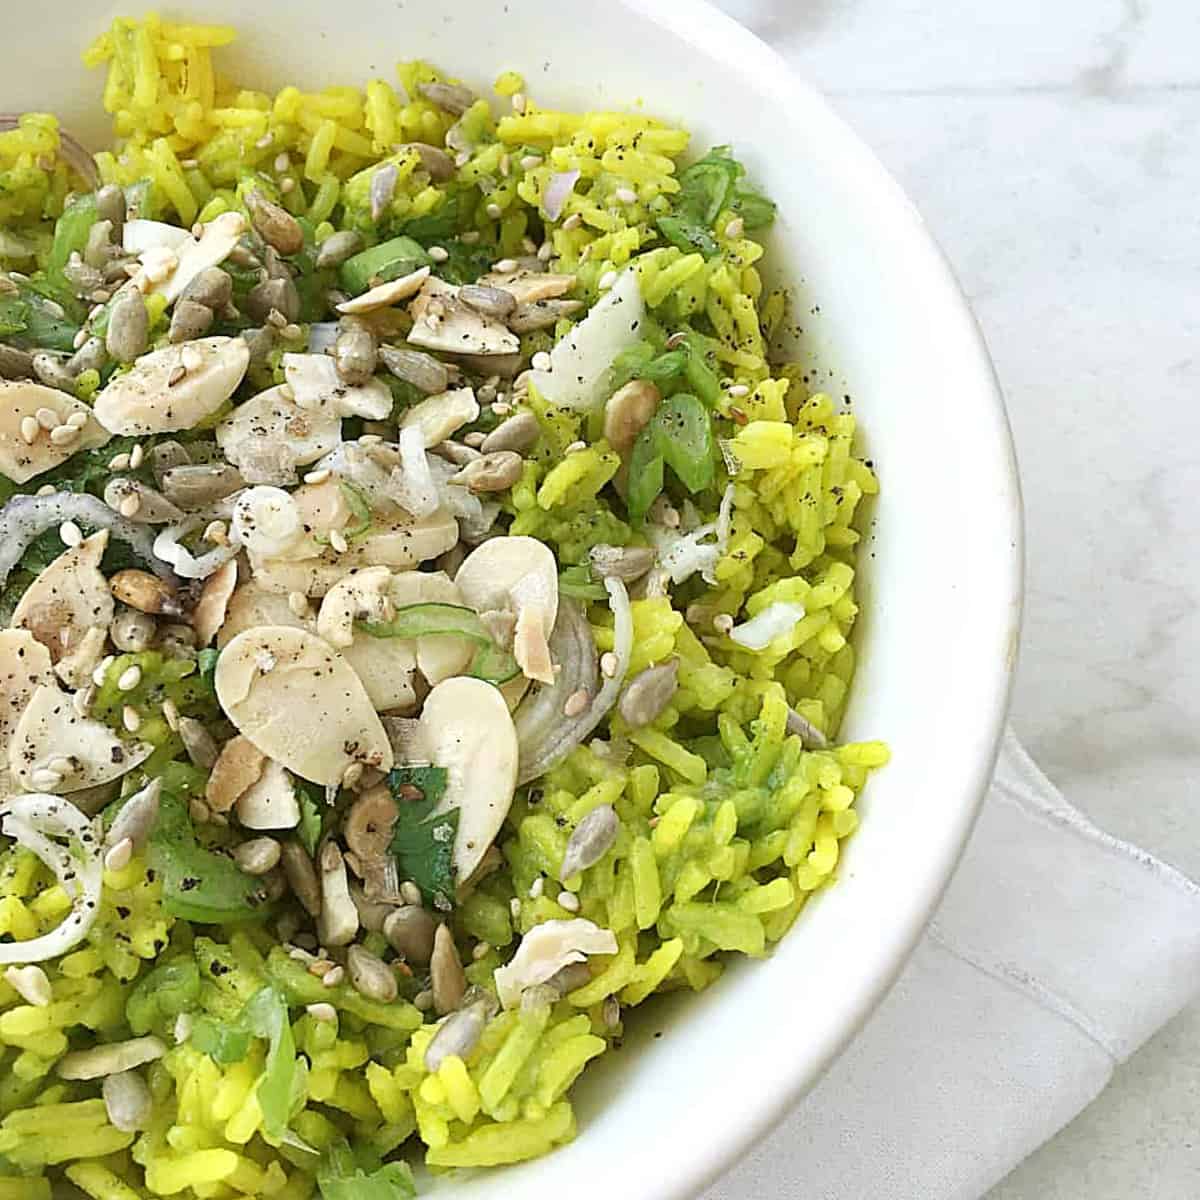 Green rice in white bowl with sliced almonds, white surface.